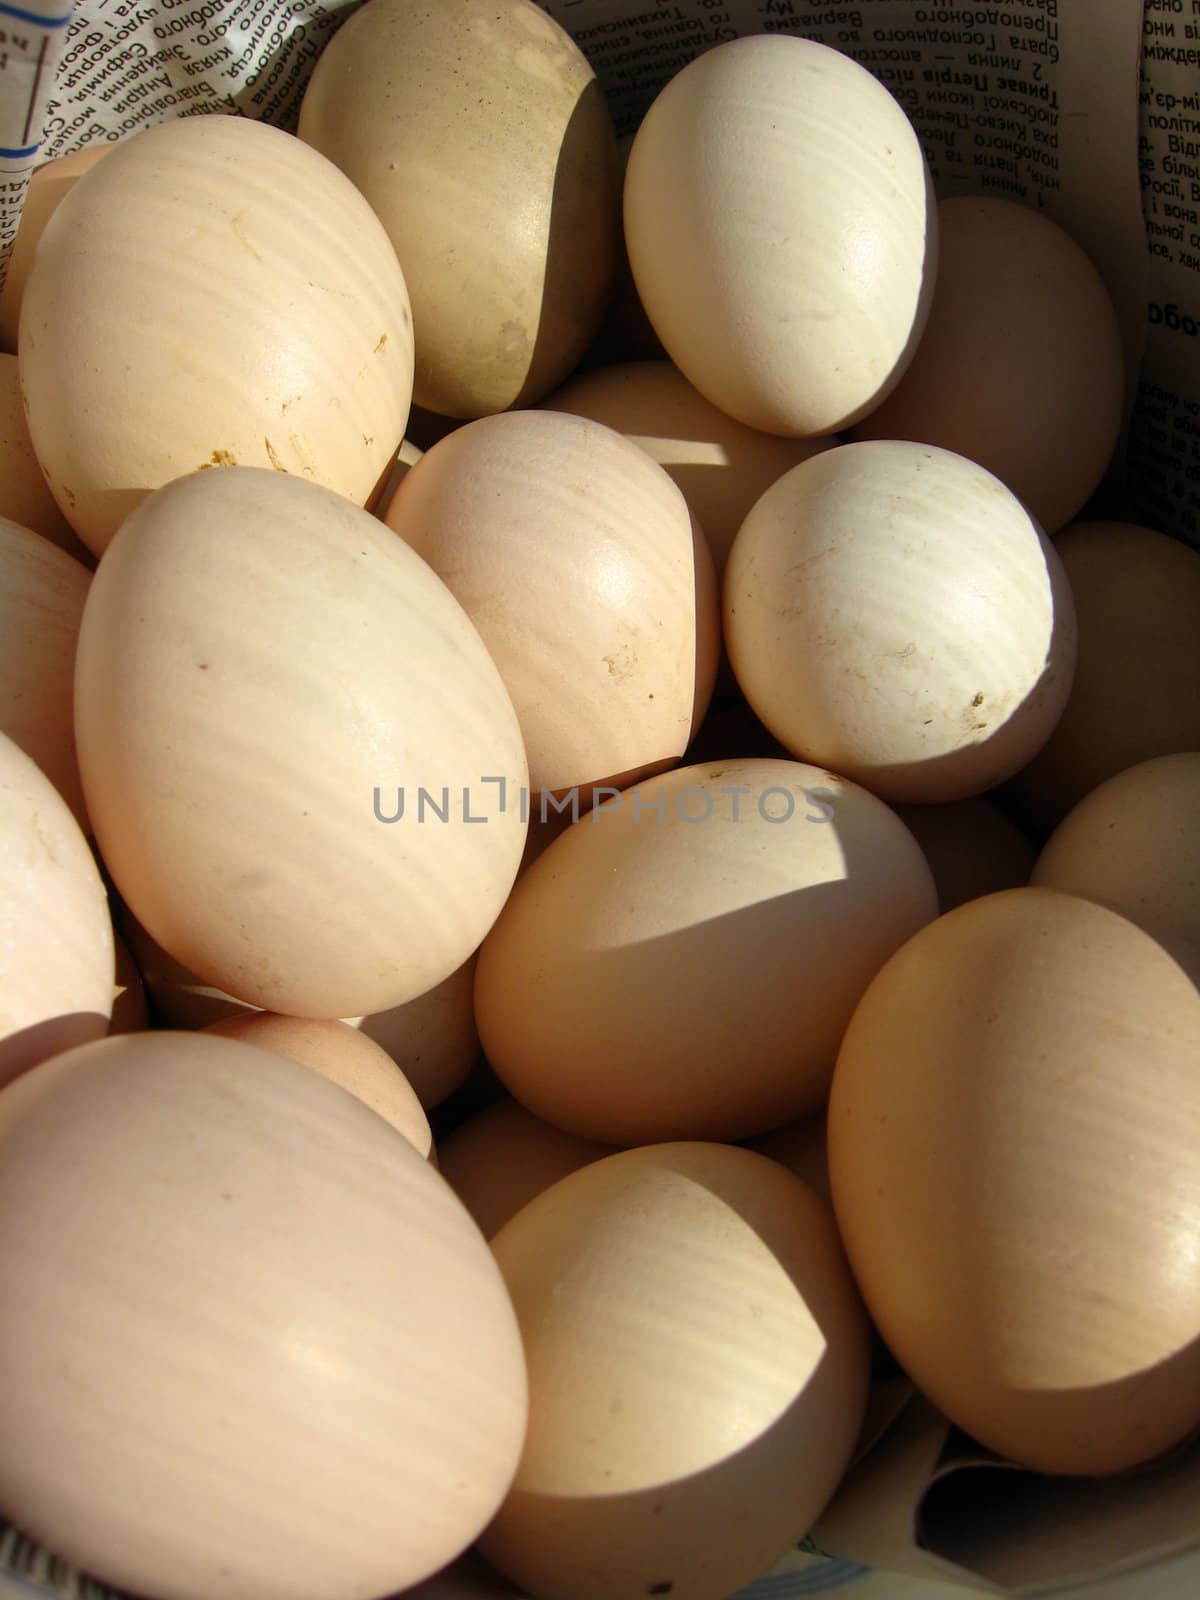 The image of many tasty eggs of the hen